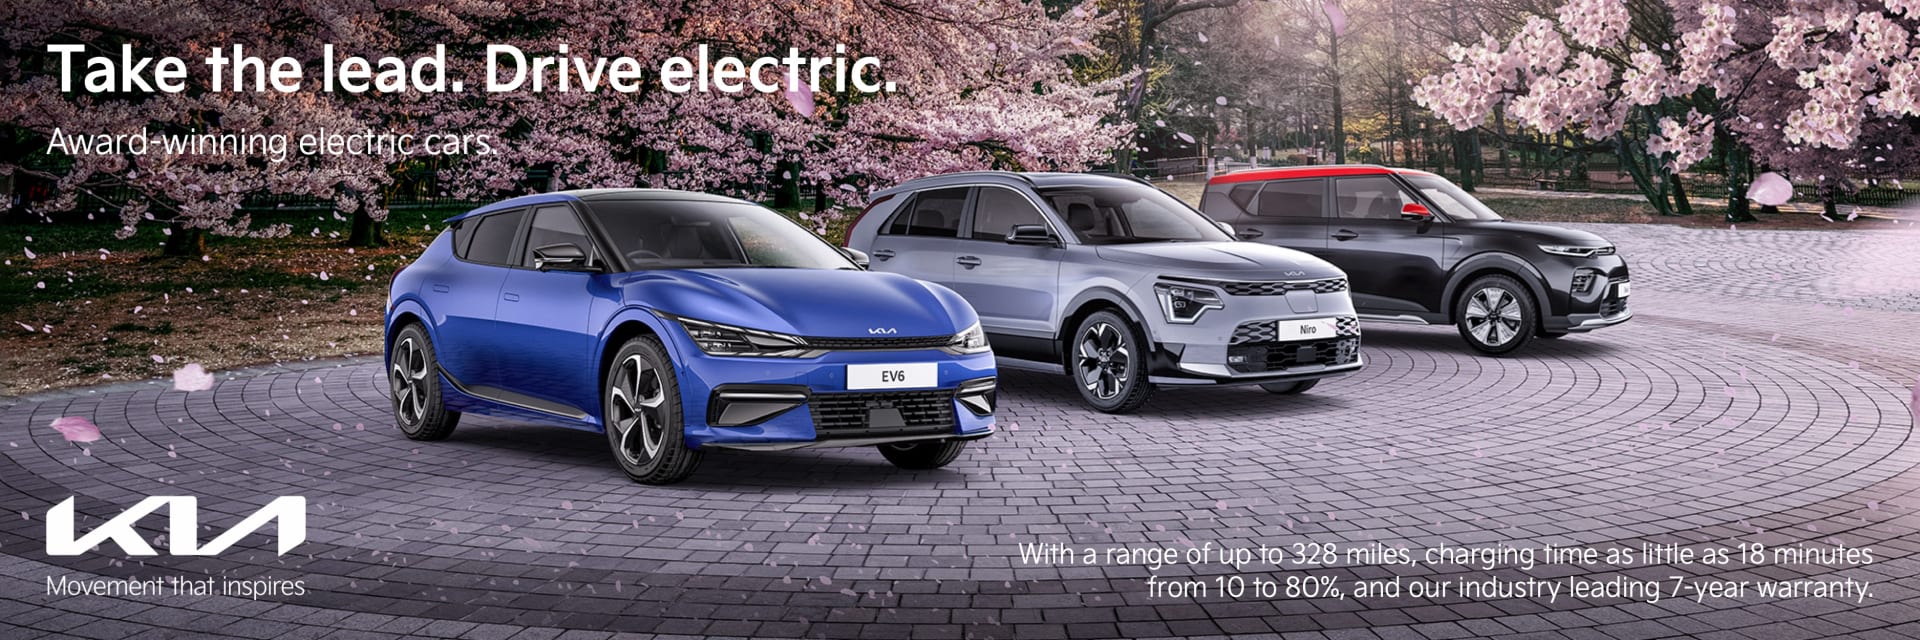 Range of Kia Electric vehicles parked in front of trees with pink blossoms